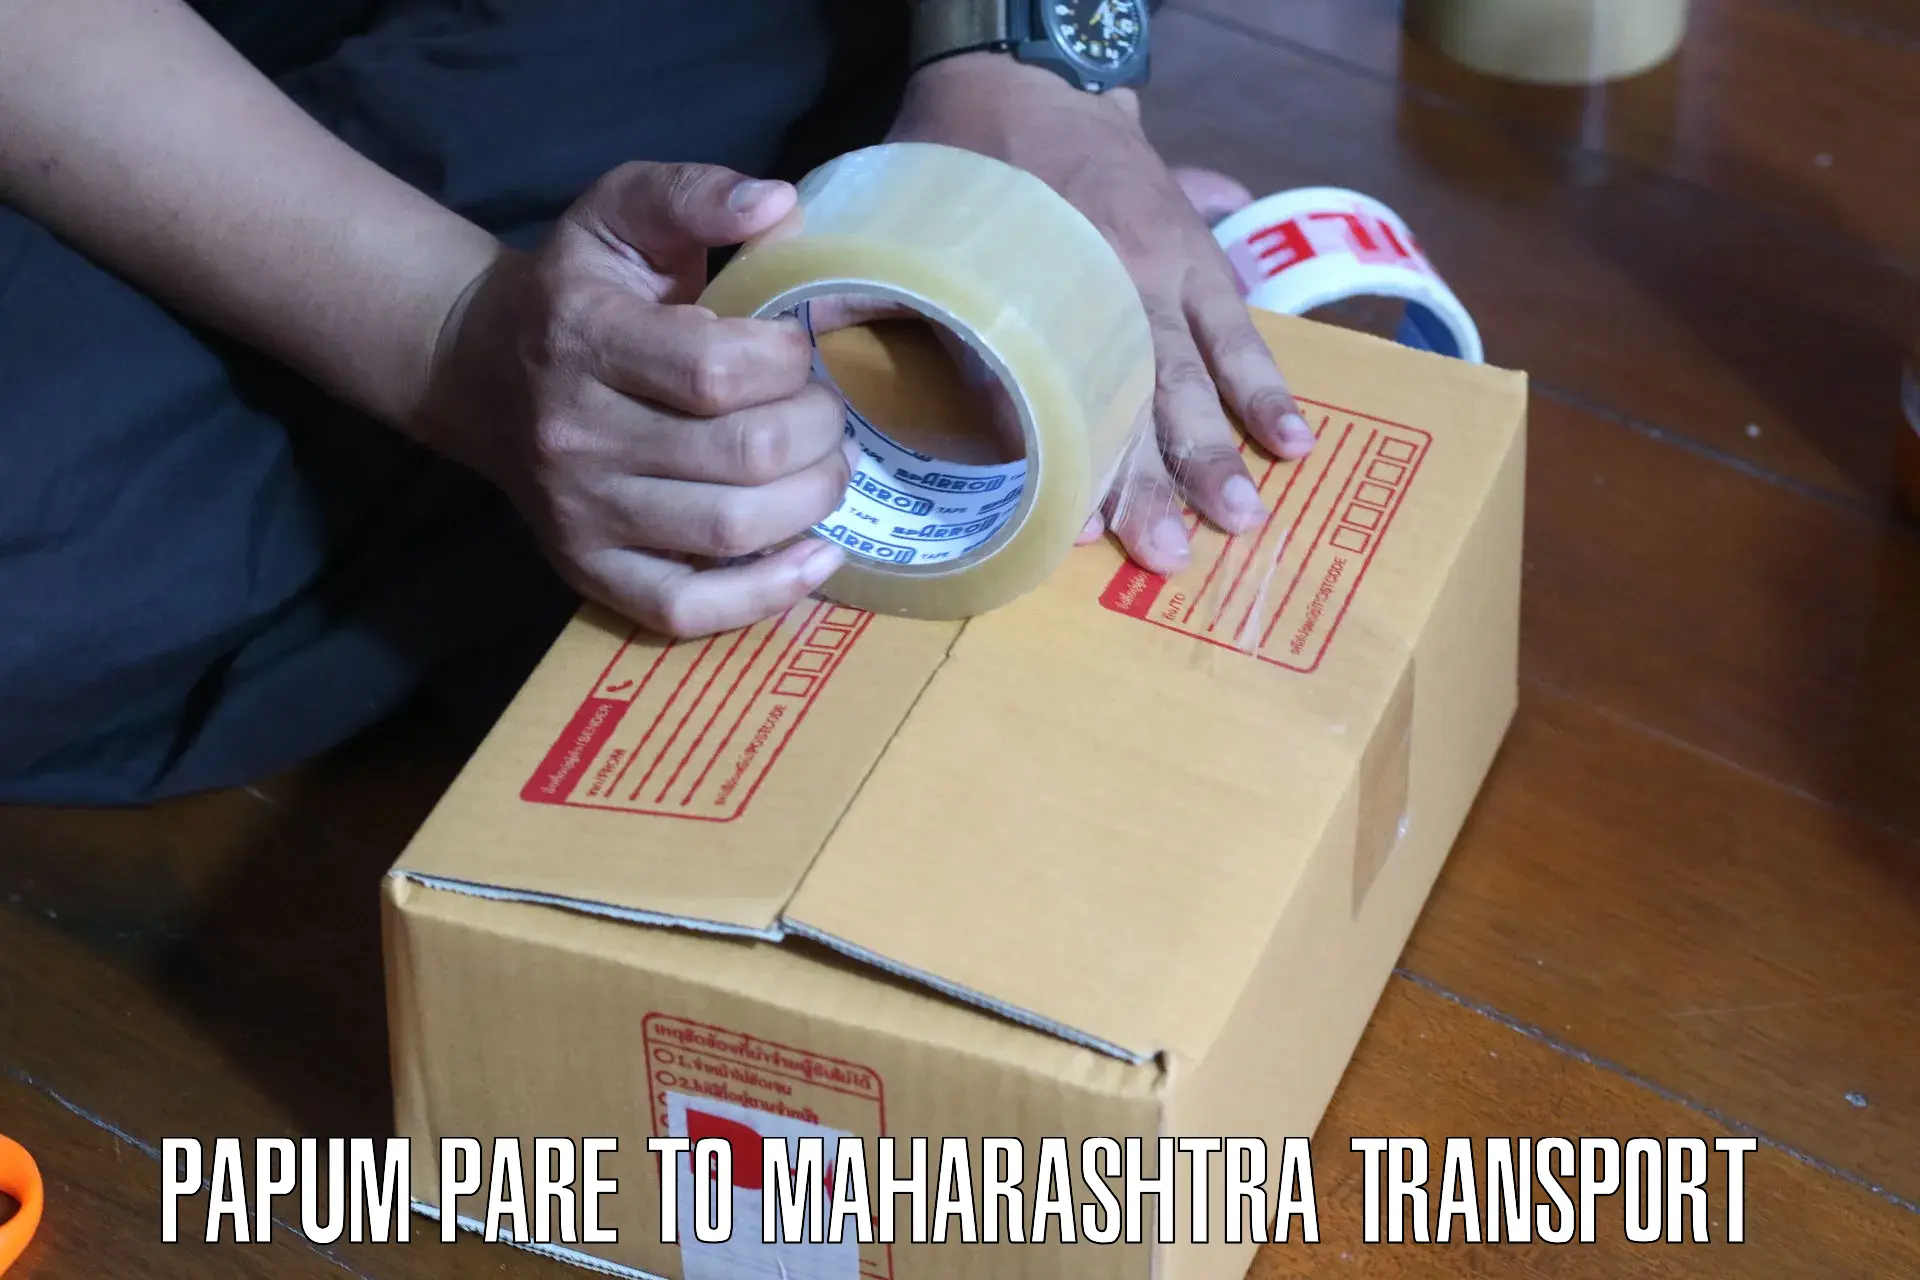 Truck transport companies in India Papum Pare to Sindhudurg